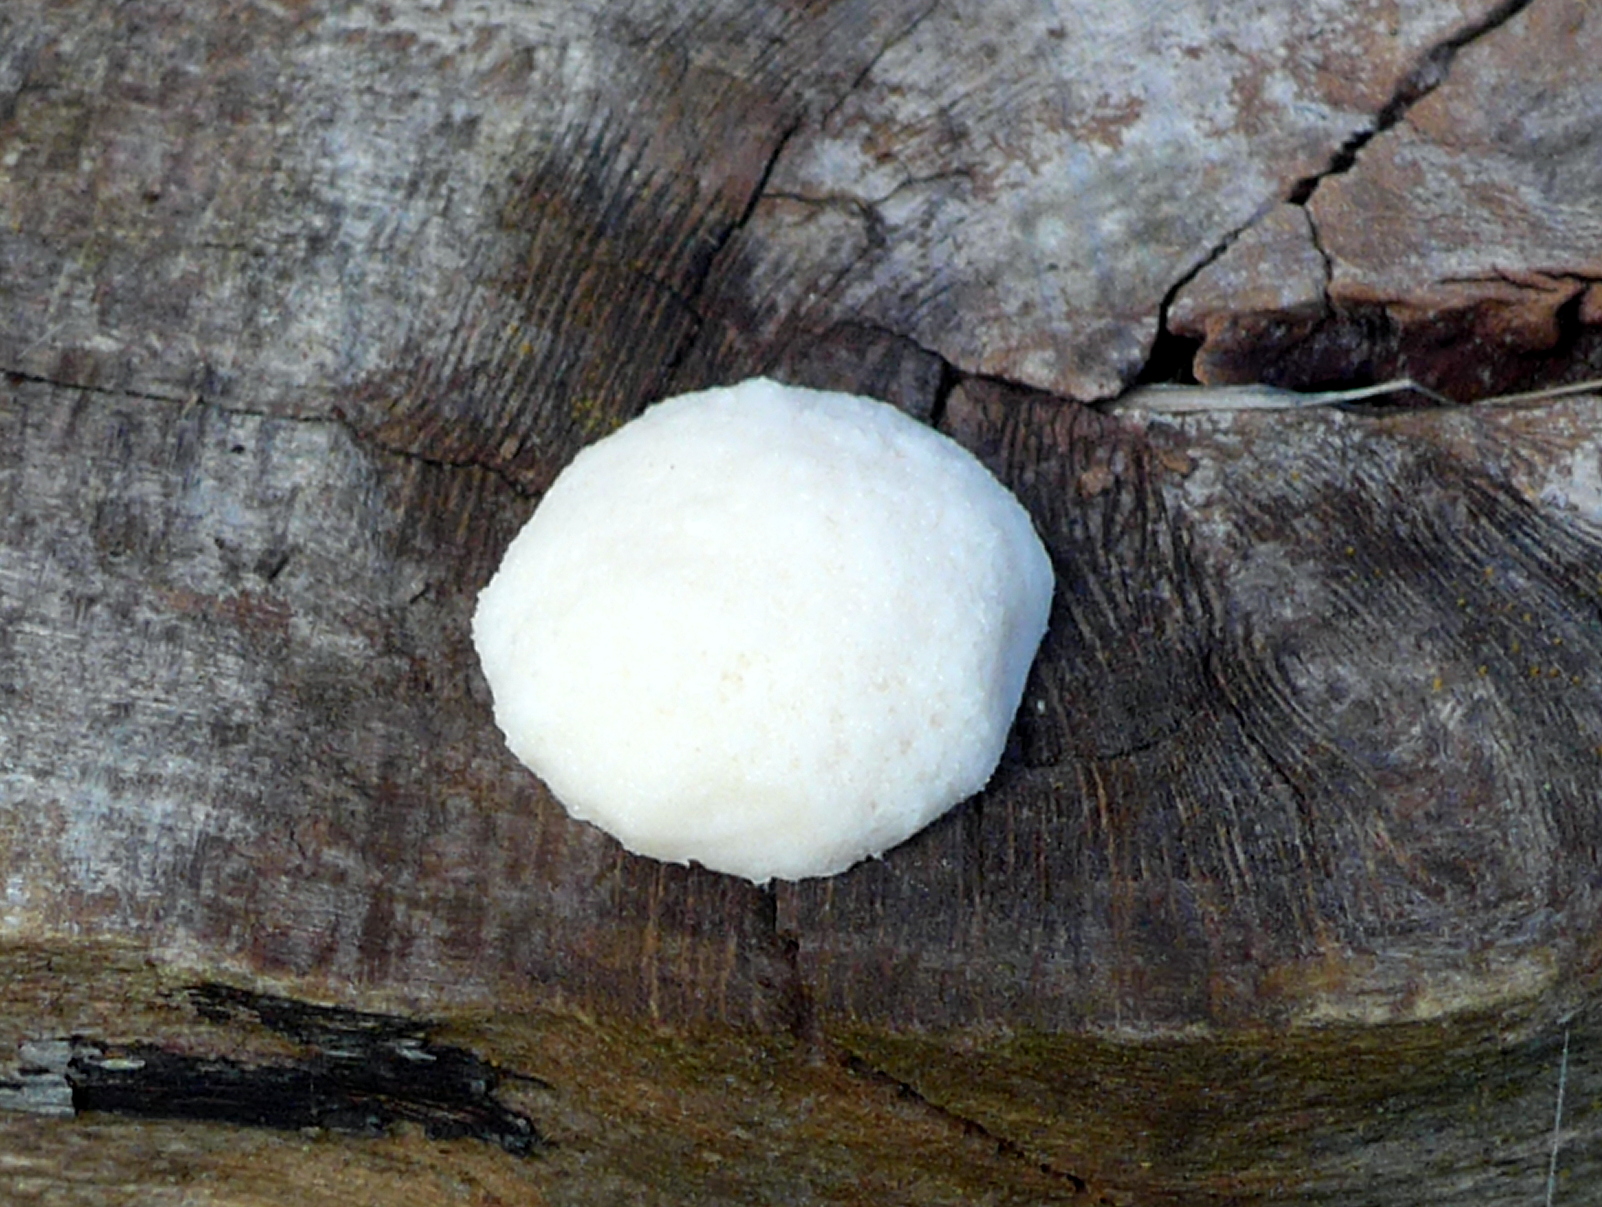 01.Calvatia gigantea, commonly known in English as the giant puffball